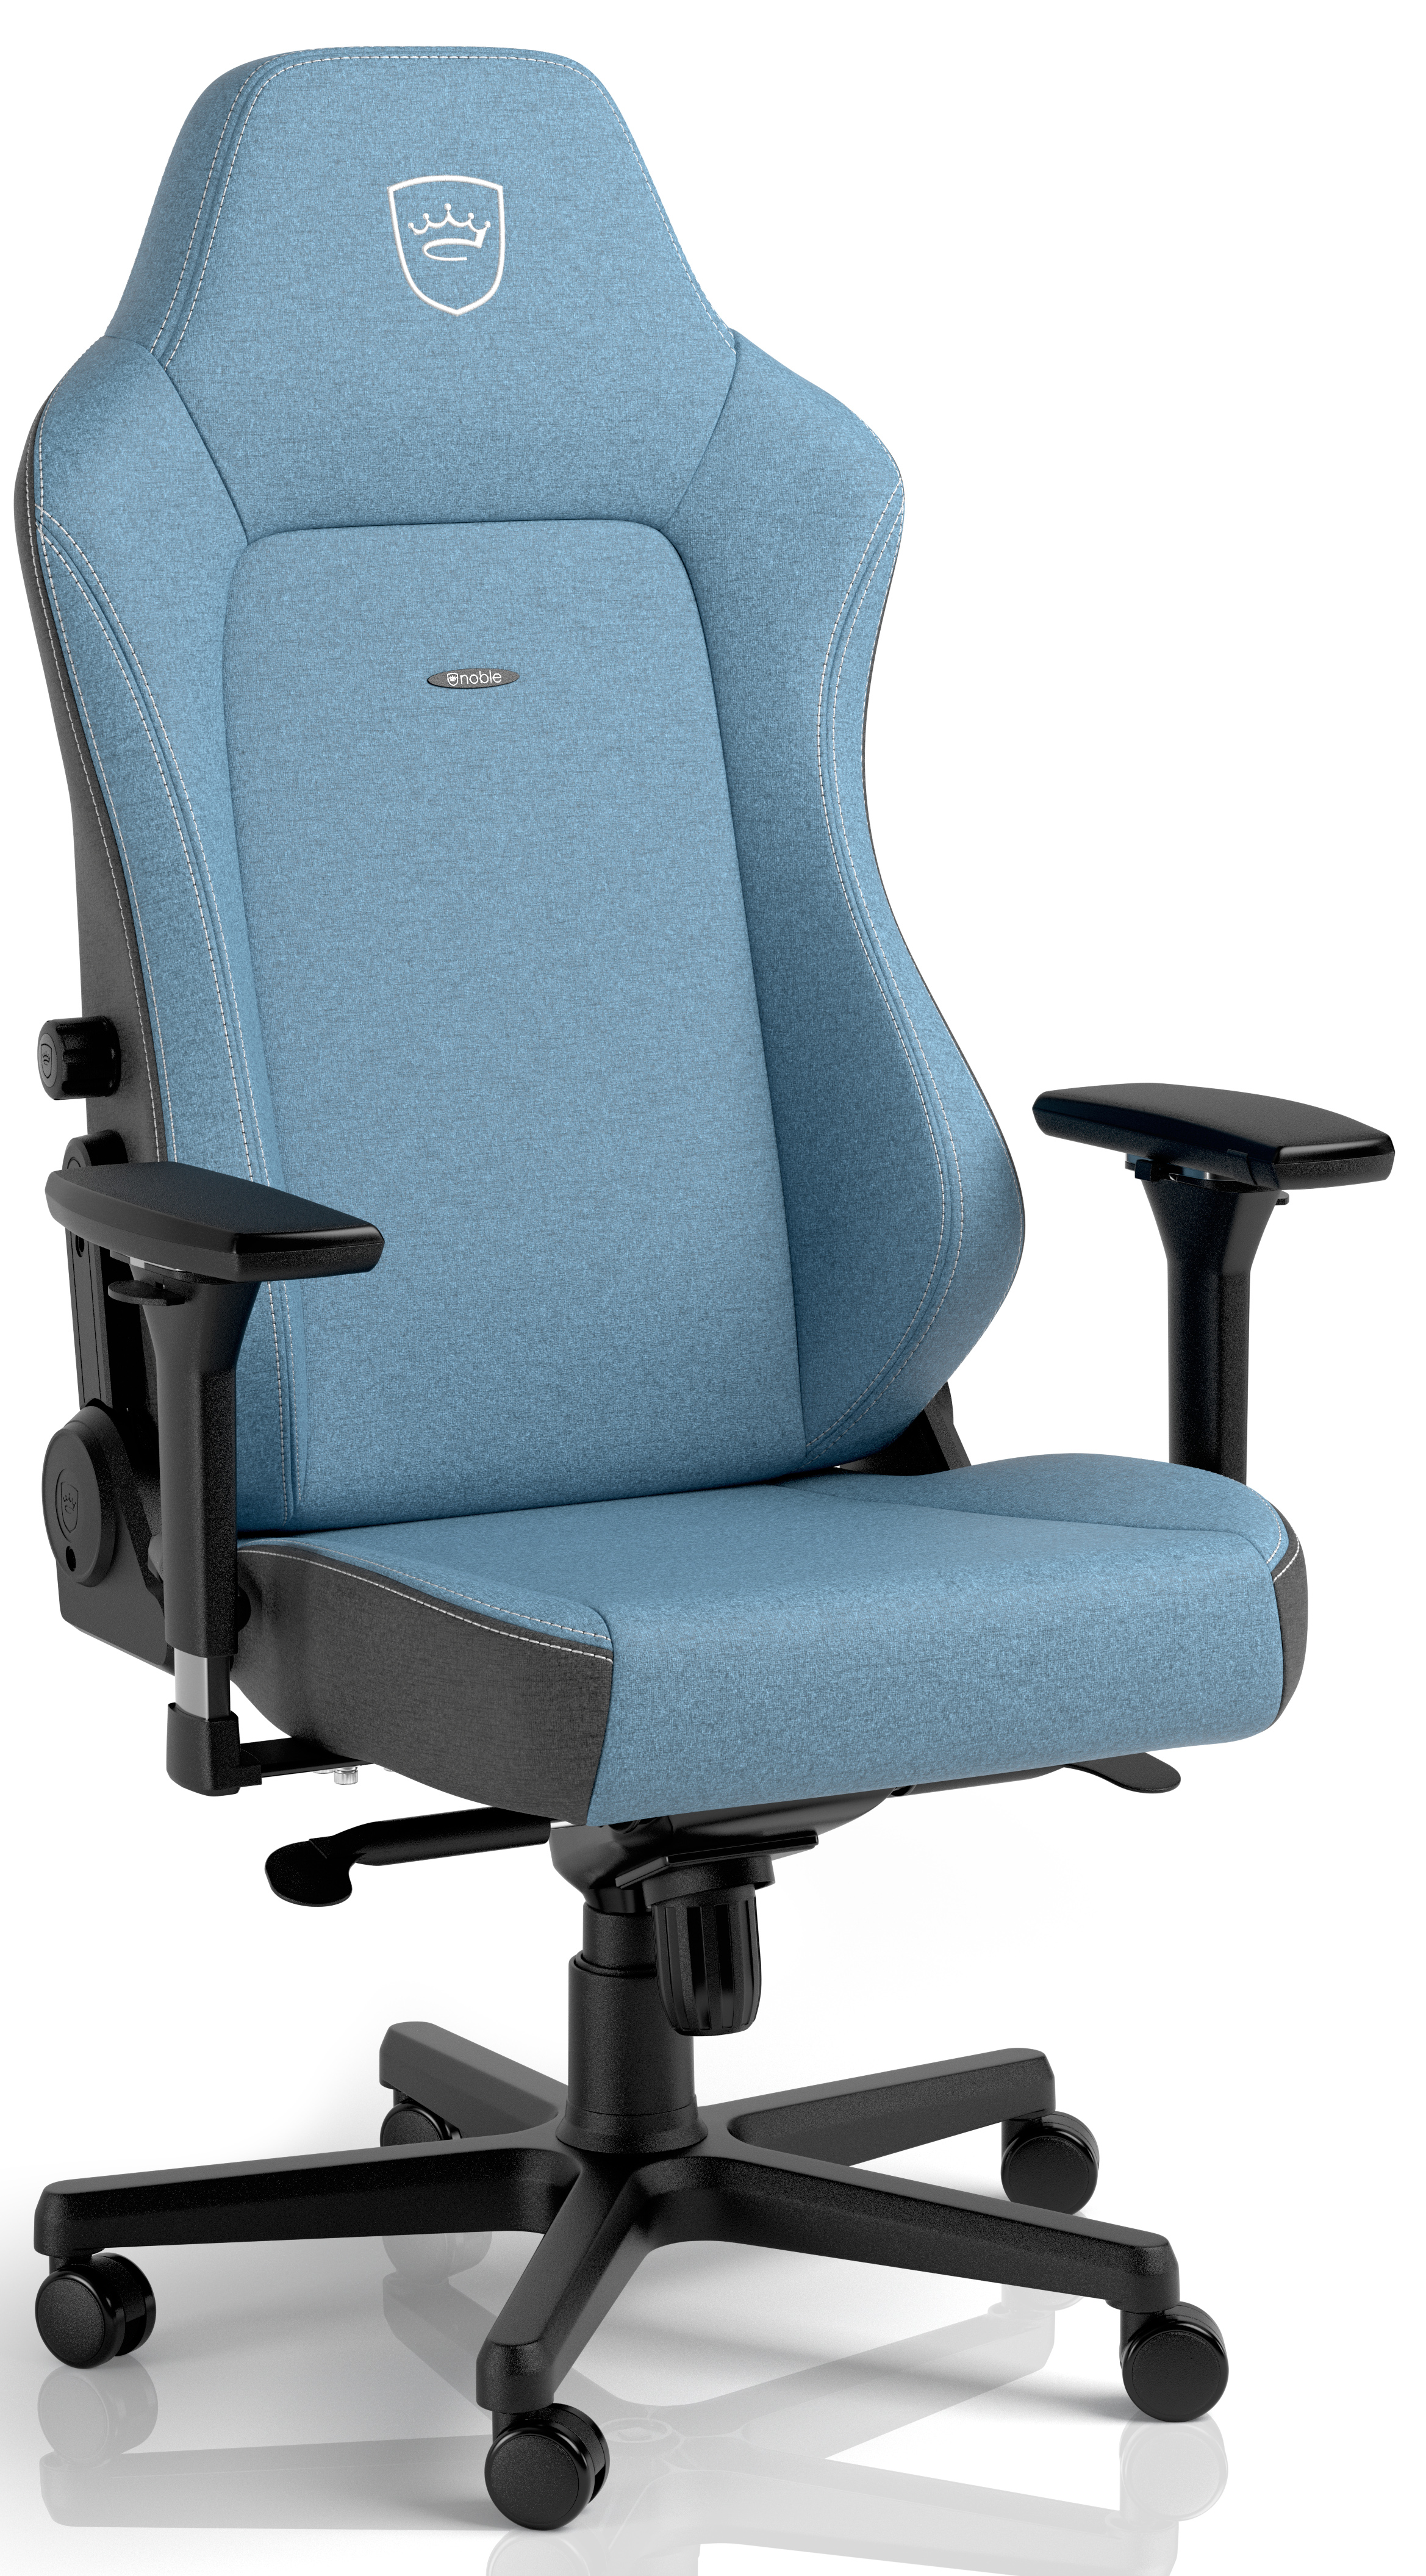 ** B Grade ** Silla noblechairs Hero Two Tone - Blue Limited Edition